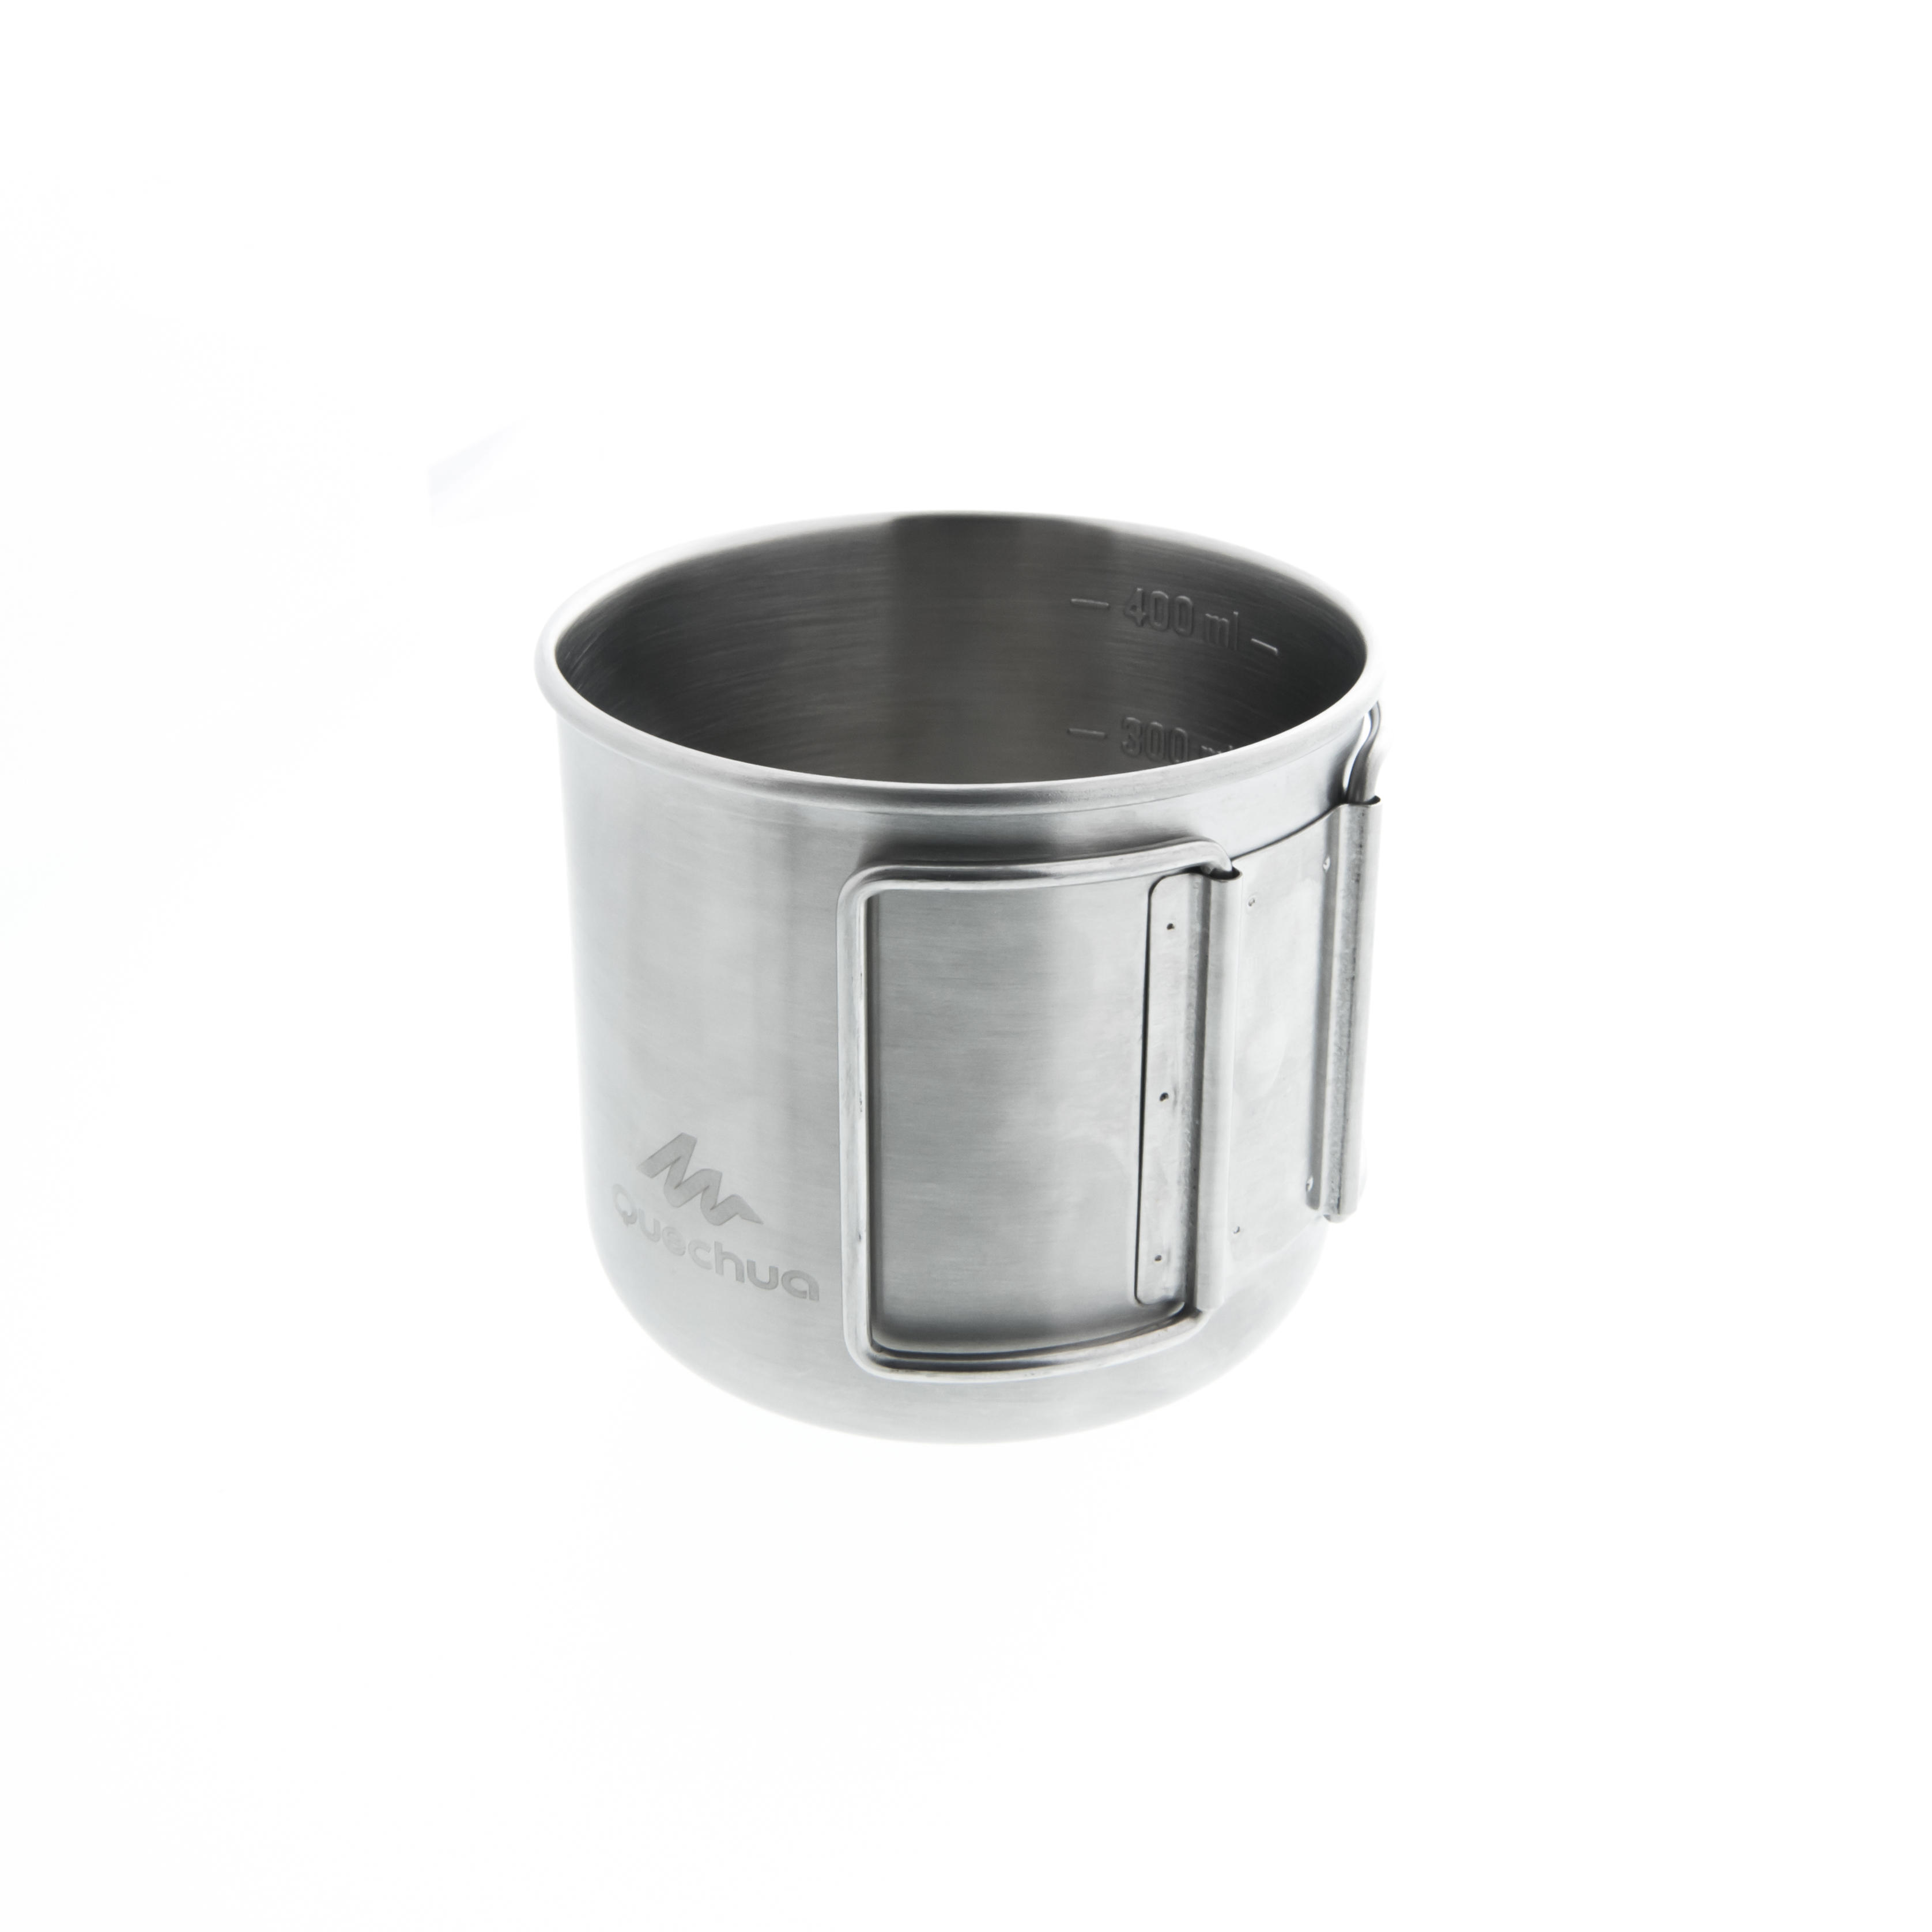 MH150 0.4 L Stainless Steel Camping Mug - QUECHUA